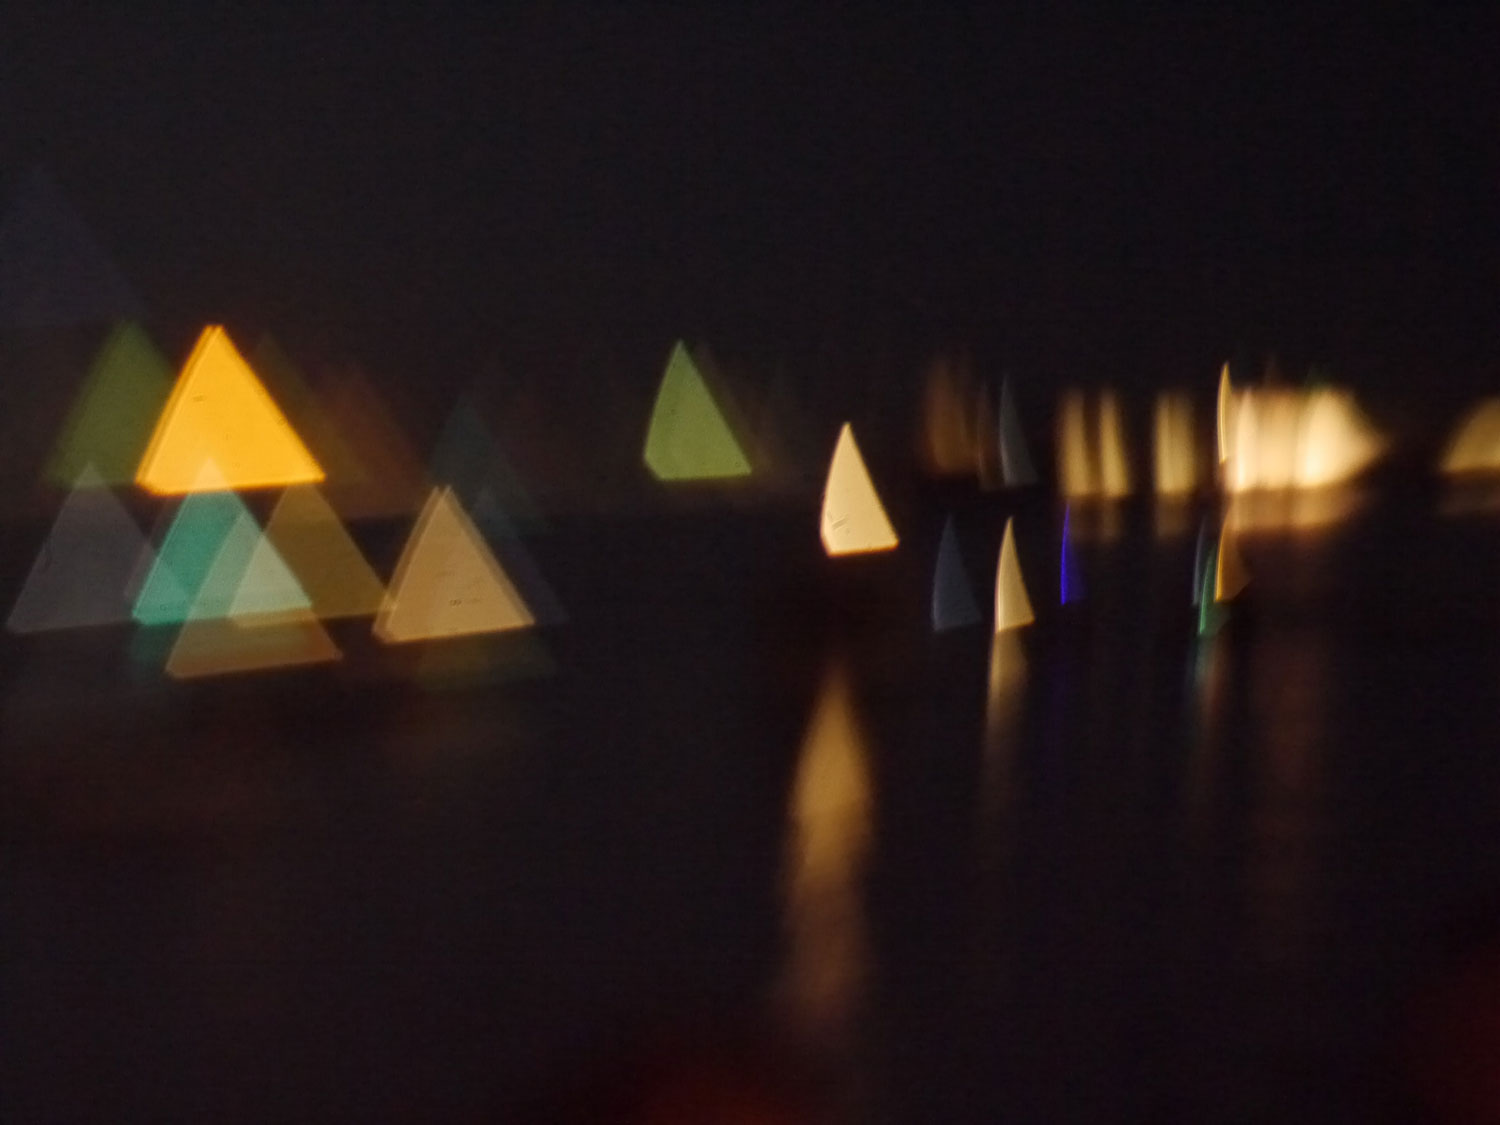 Abstract lights on a black background in the form of triangles.